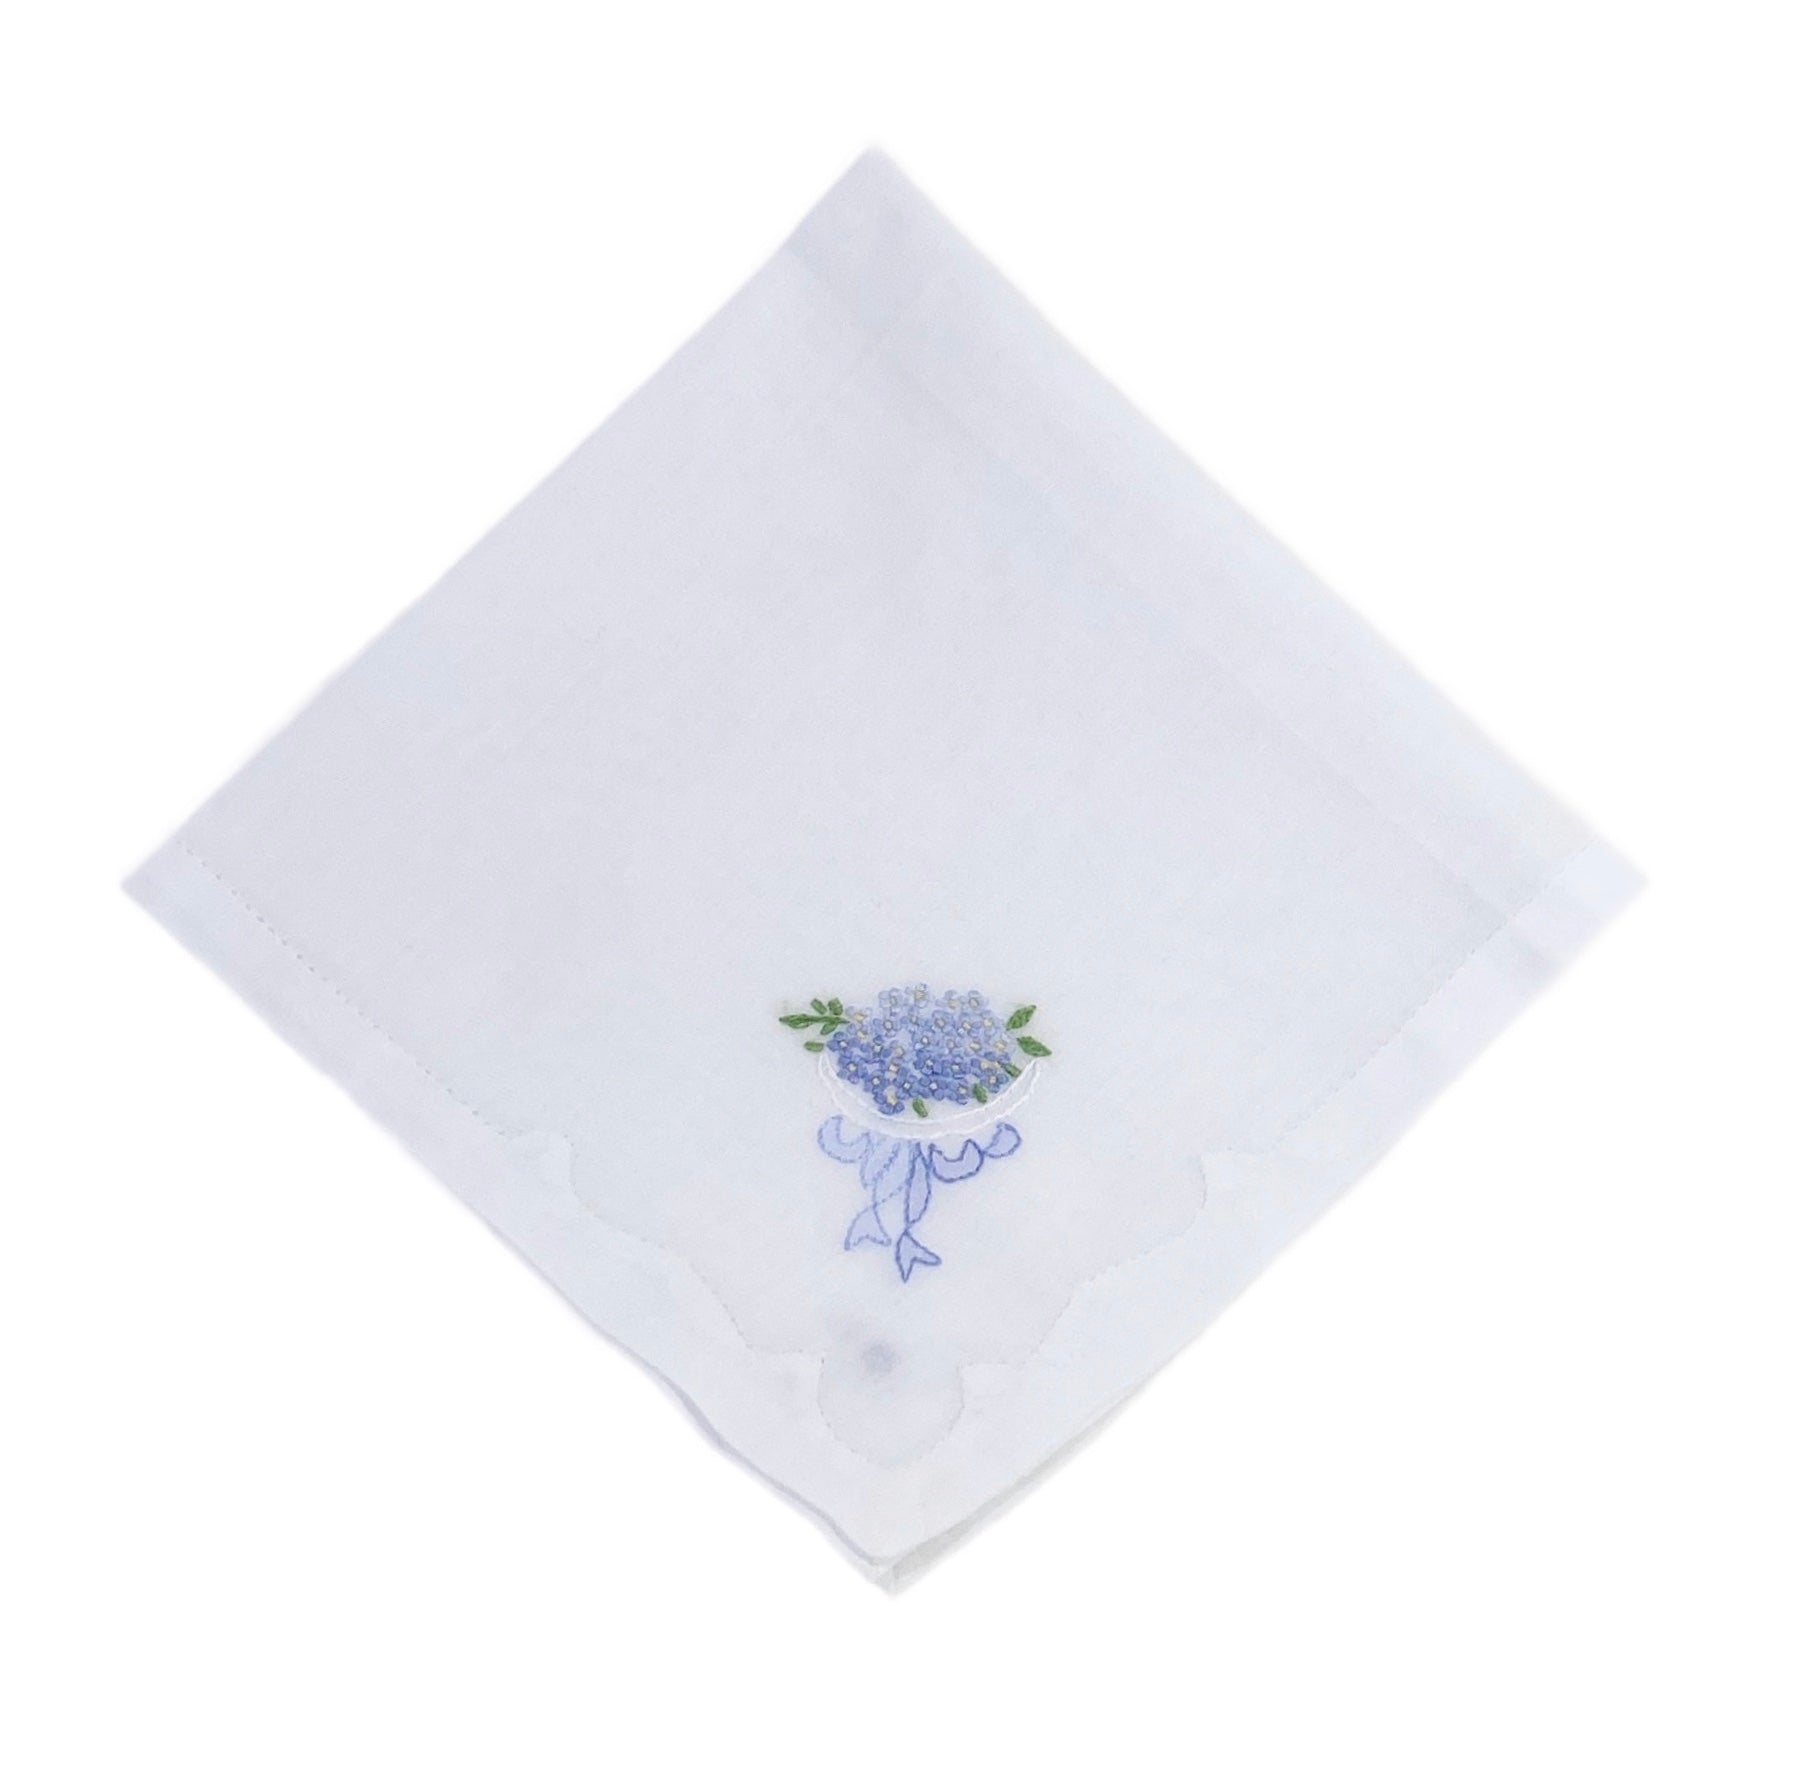 Forget Me Not Embroidered Cotton Hankie